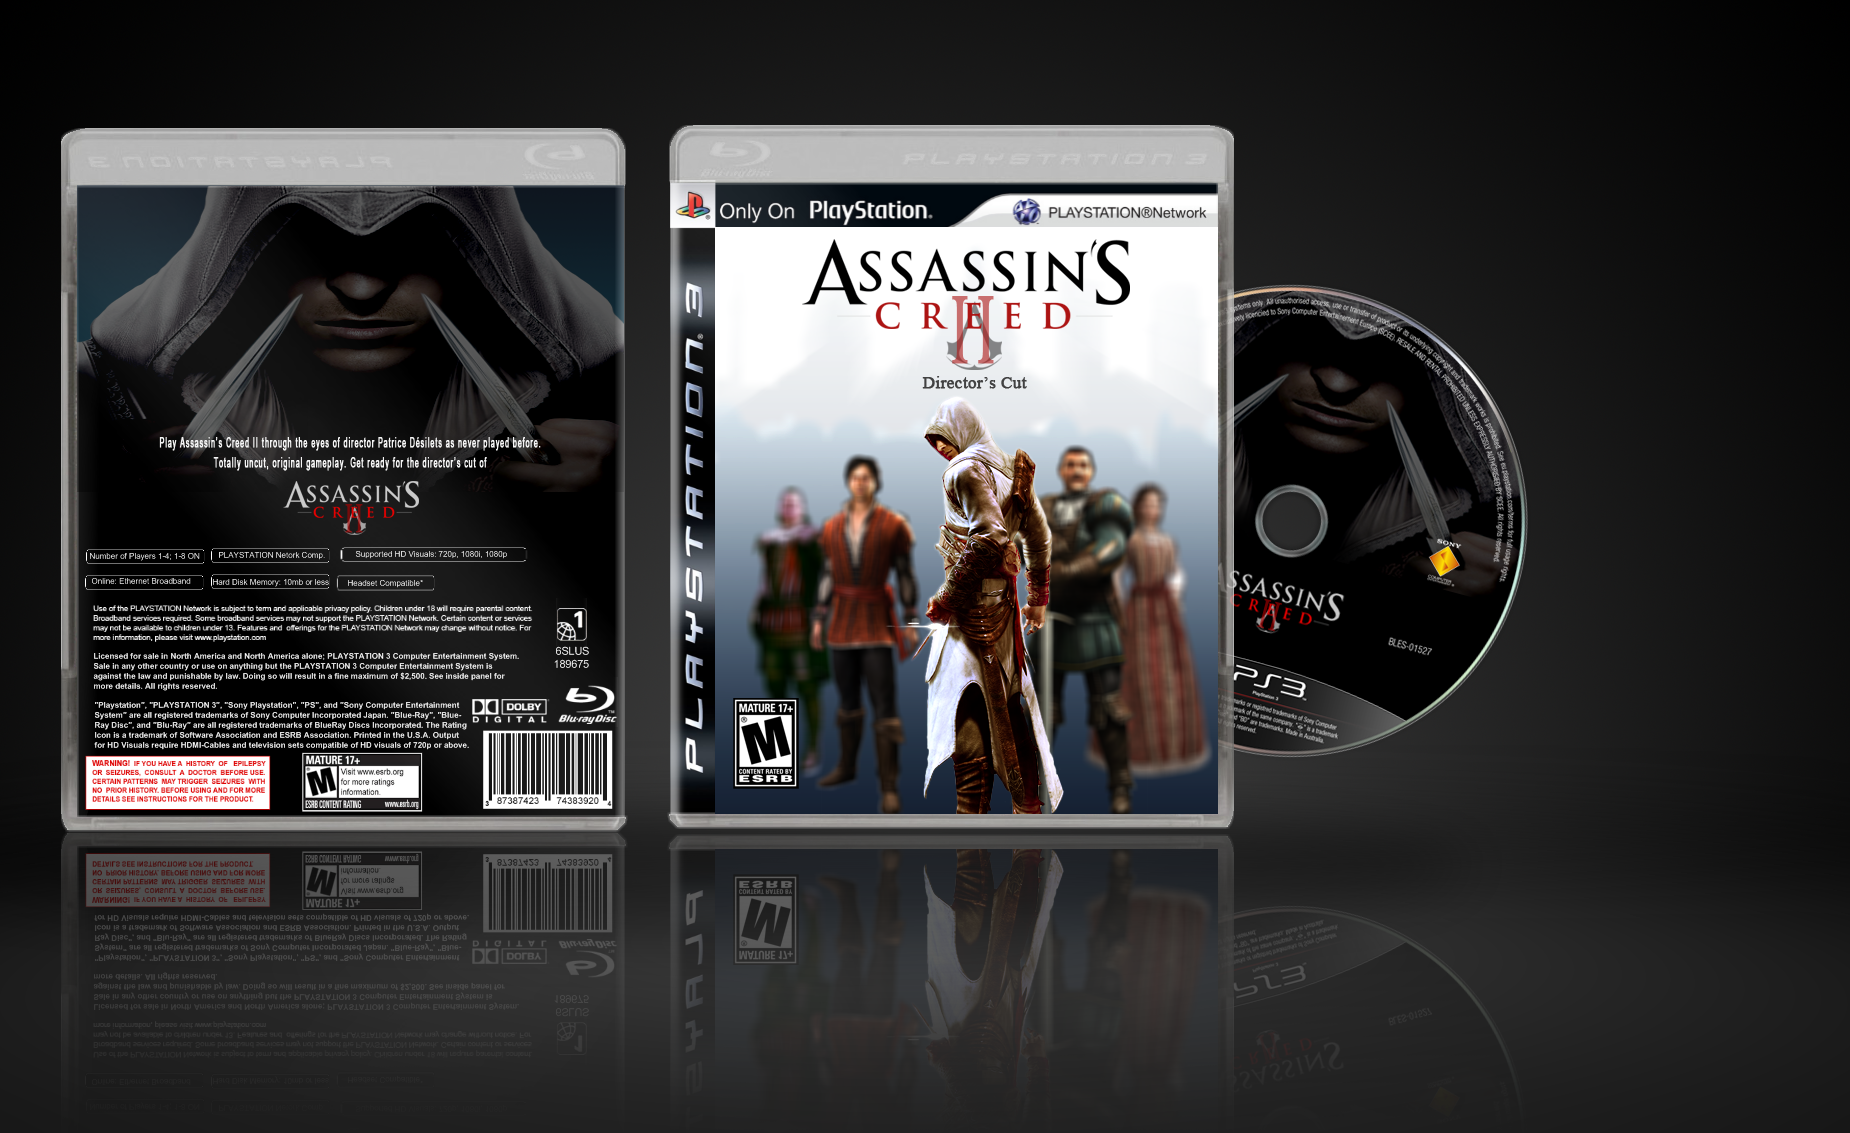 Assassin's Creed II Director's Cut box cover